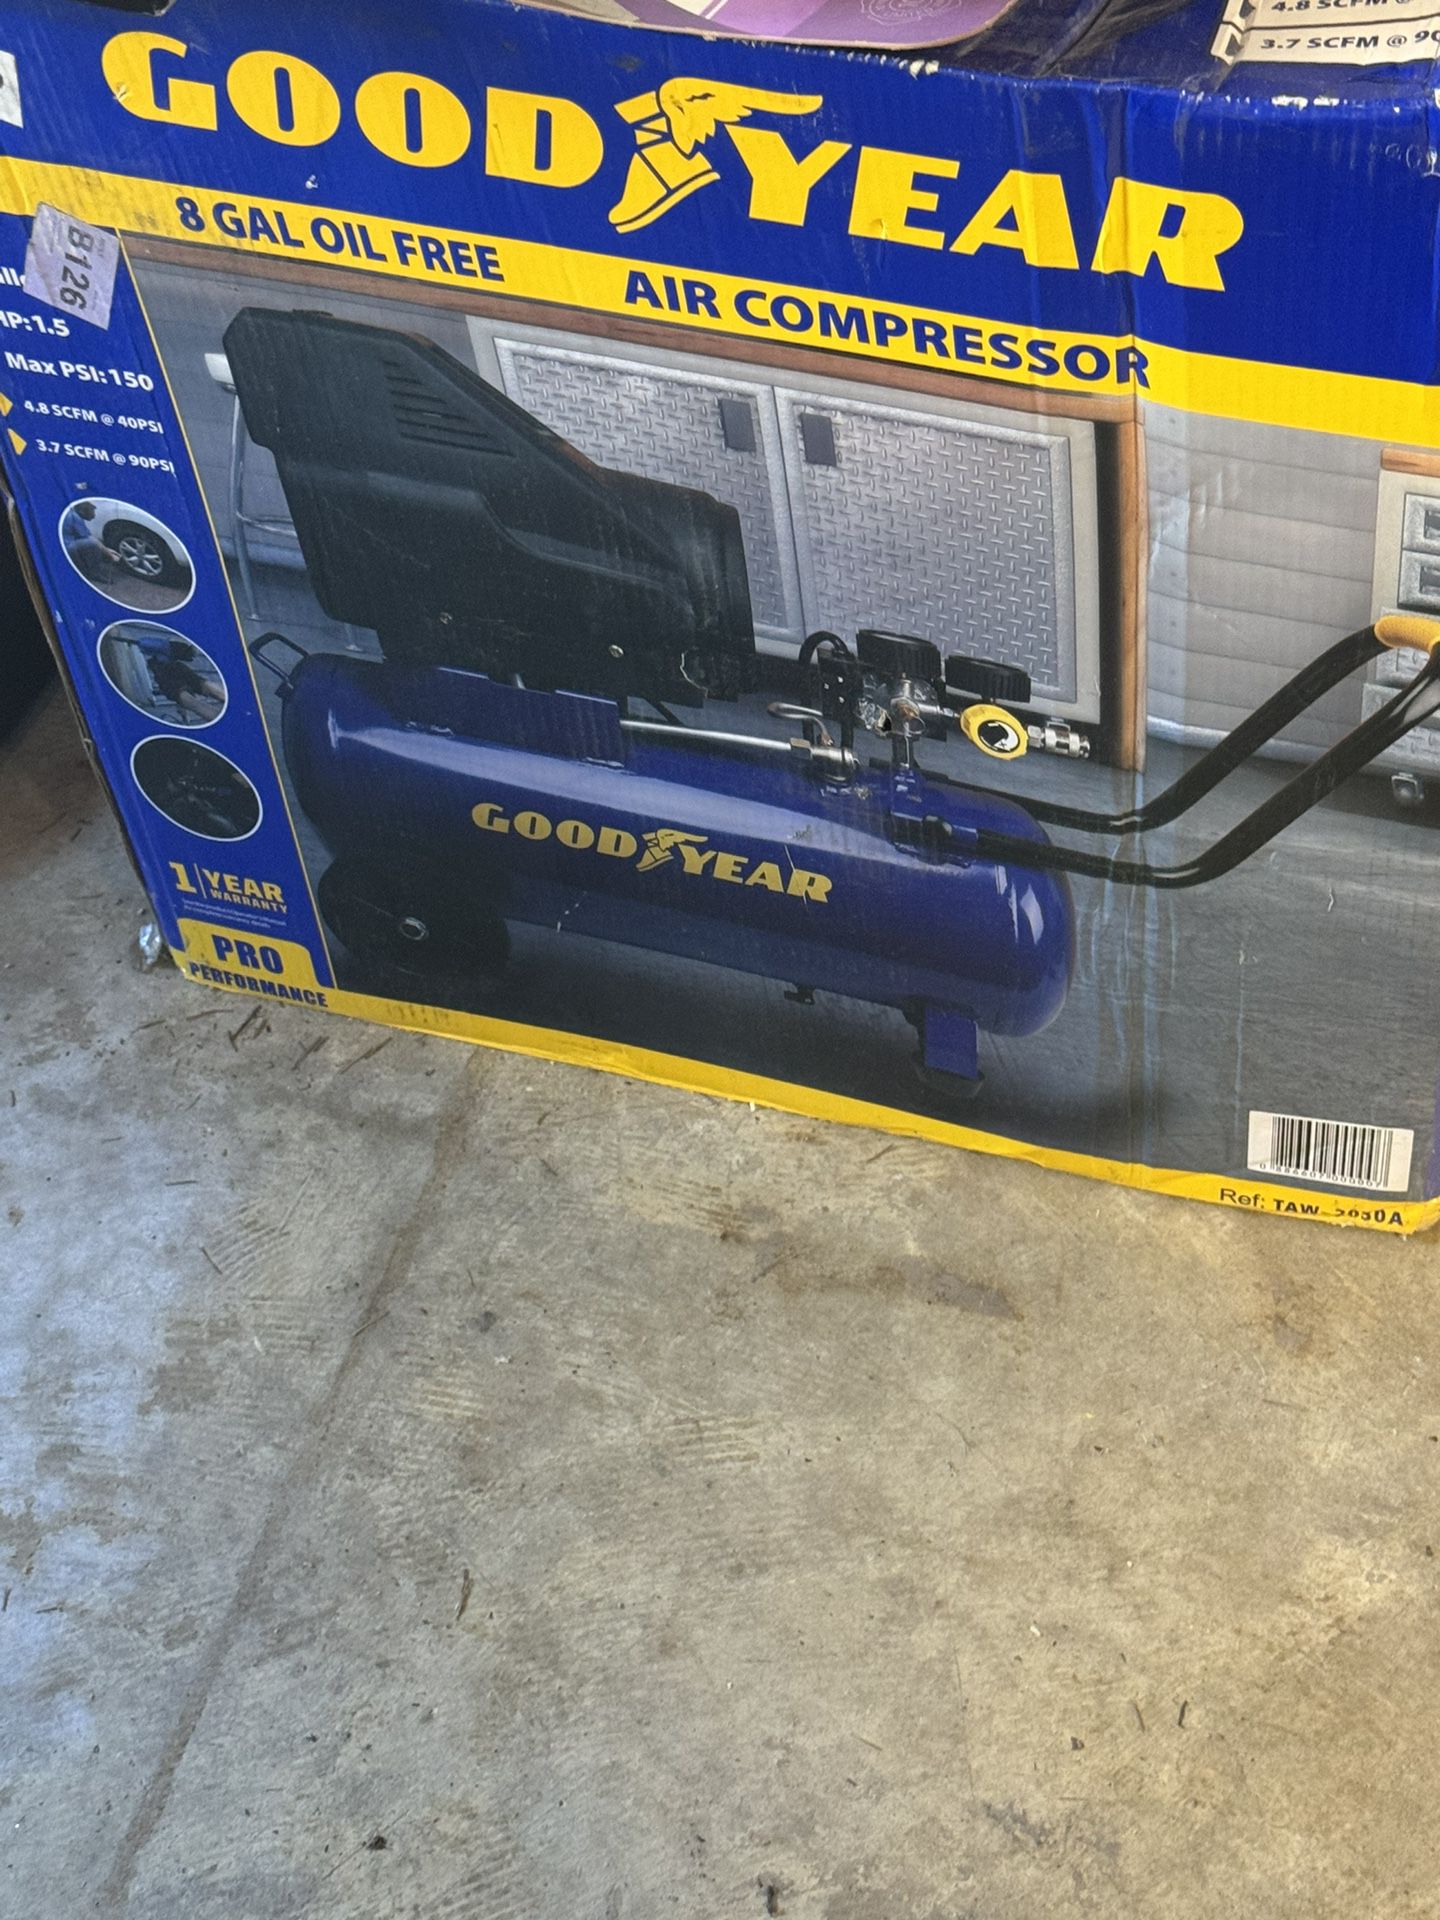 Good year Air Compressor! New in box!